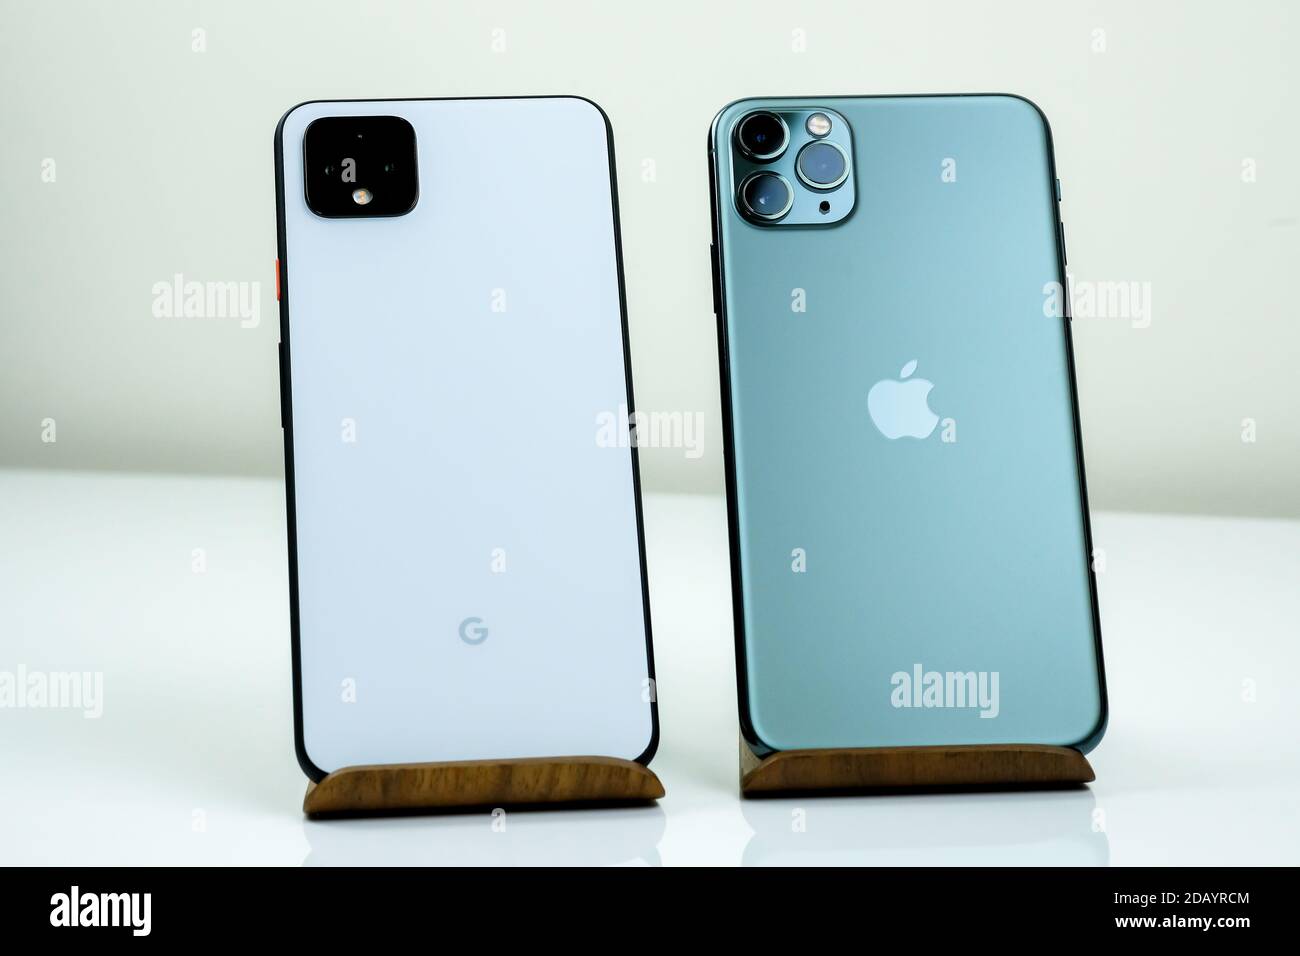 Google Pixel 4 Xl In Clearly White Color And Iphone 11 Pro Max In Midnight Green Stock Photo Alamy